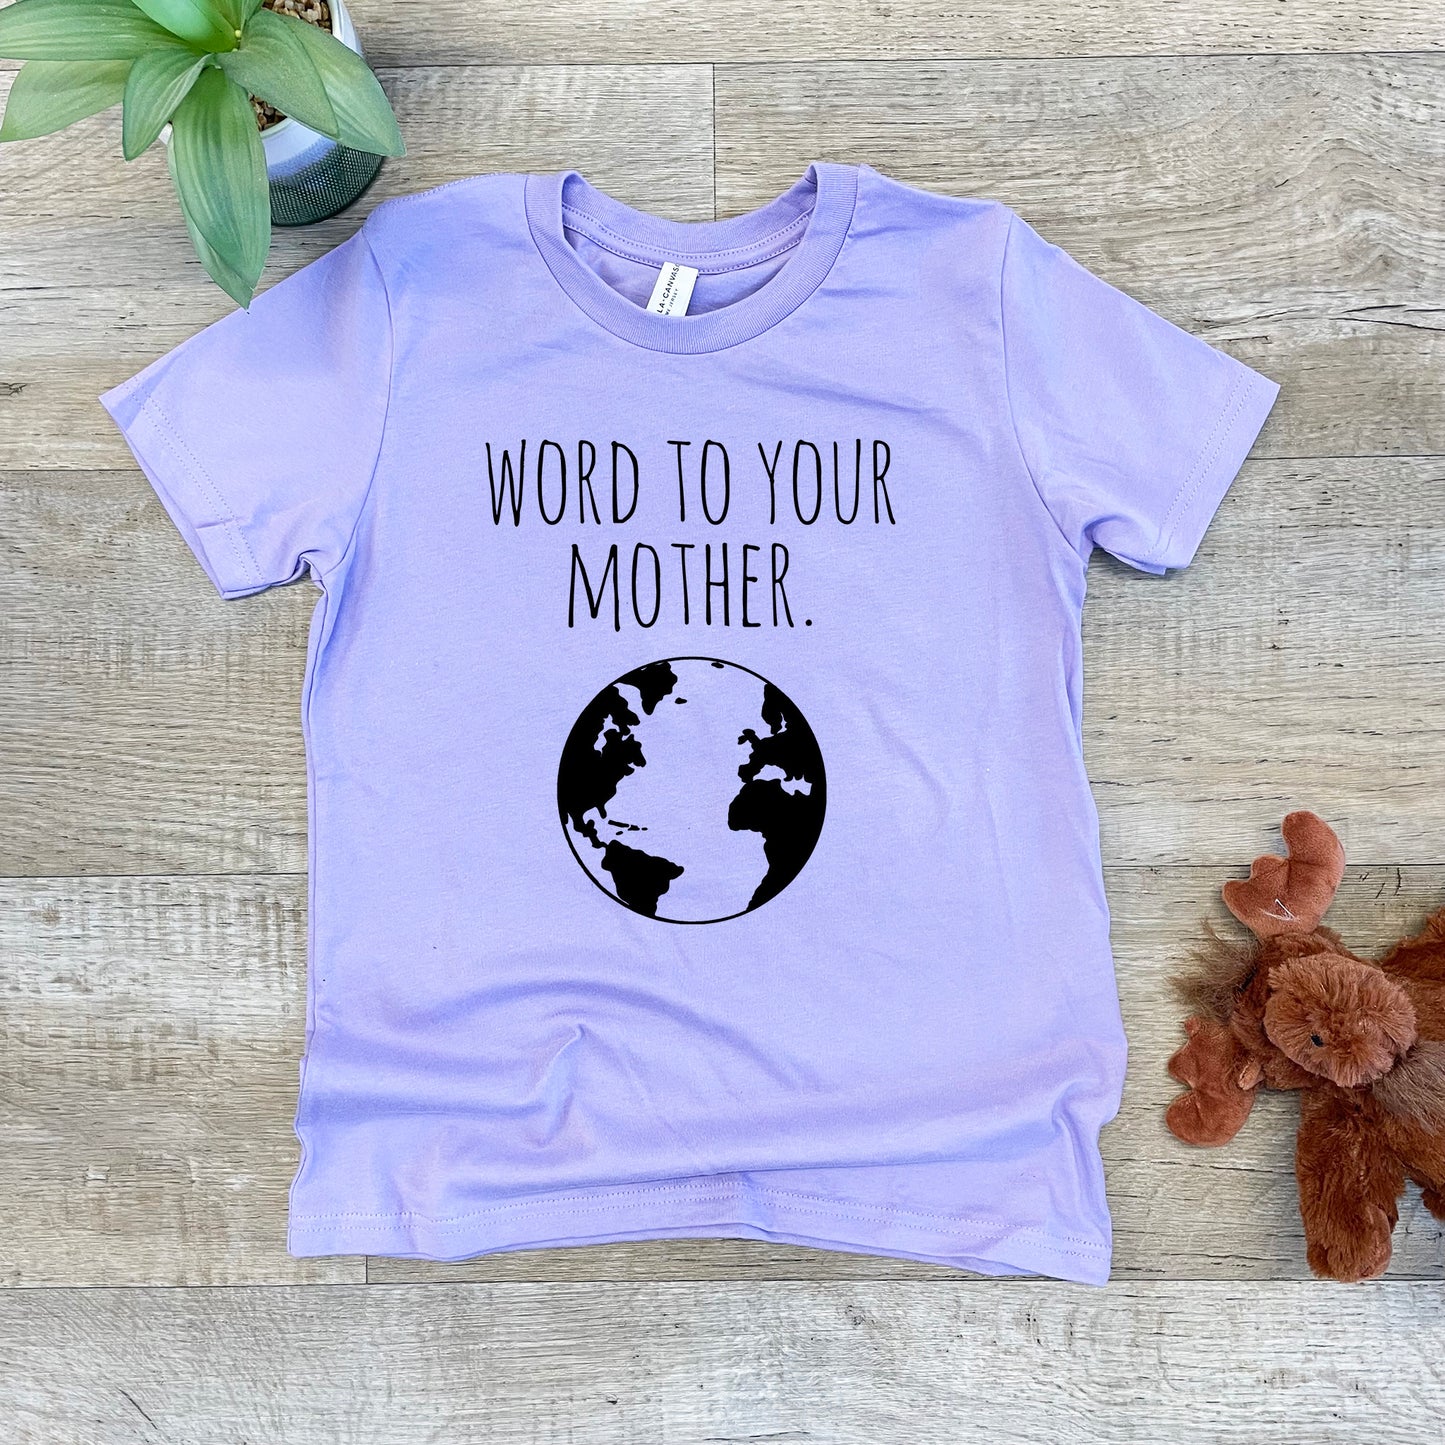 Word to Your Mother (Earth) - Kid's Tee - Columbia Blue or Lavender